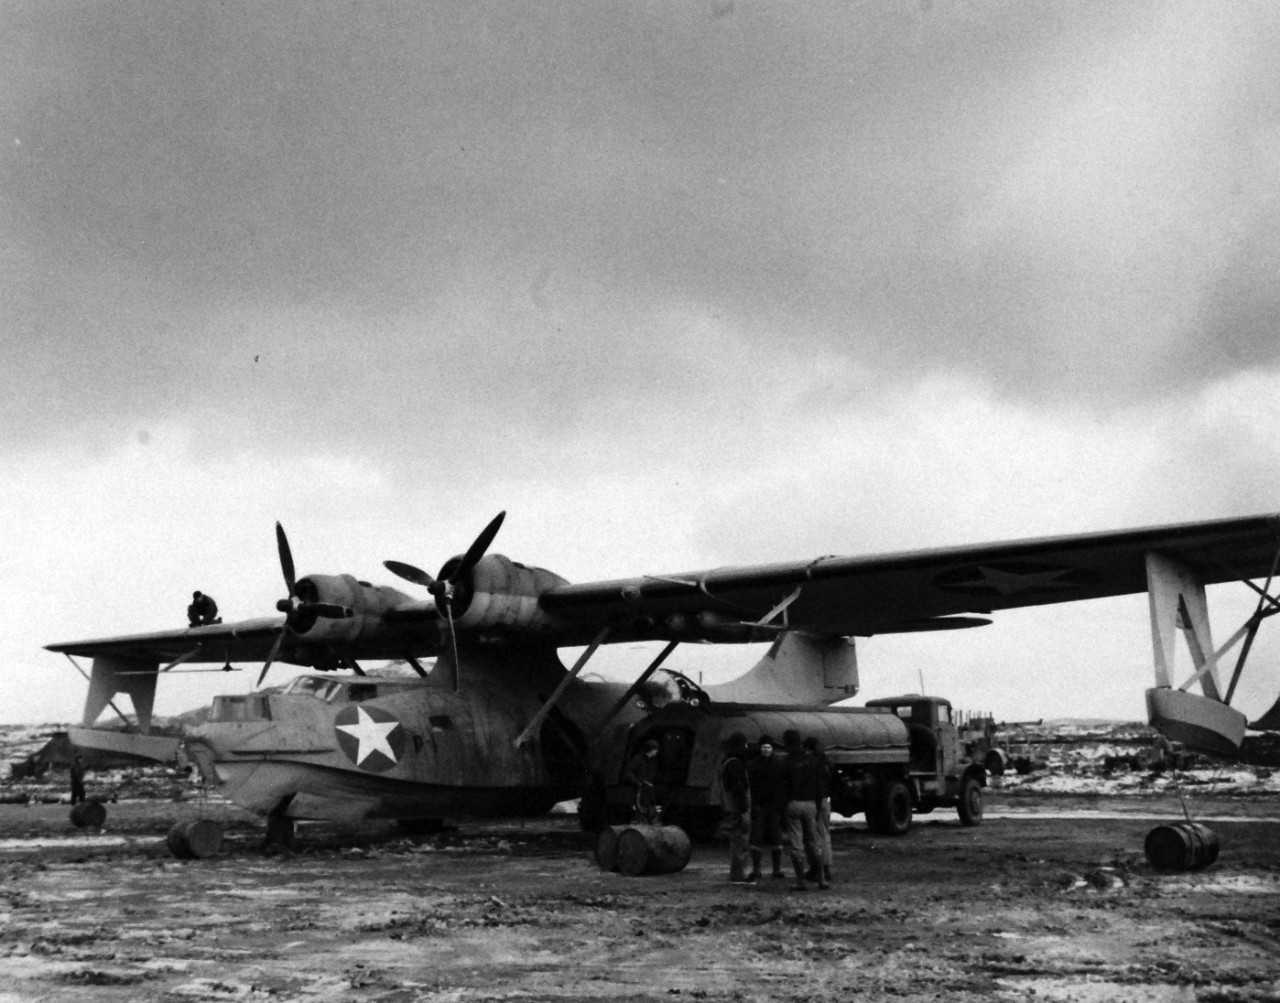 80-G-33168:    PBY-5 “Catalina” patrol bomber, 1942.    Ground crew gassing PBY-5 “Catalina” at Longview, Adak, Alaska, December 12, 1942.  Official U.S. Navy Photograph, now in the collections of the National Archives.  (2016/12/13). 